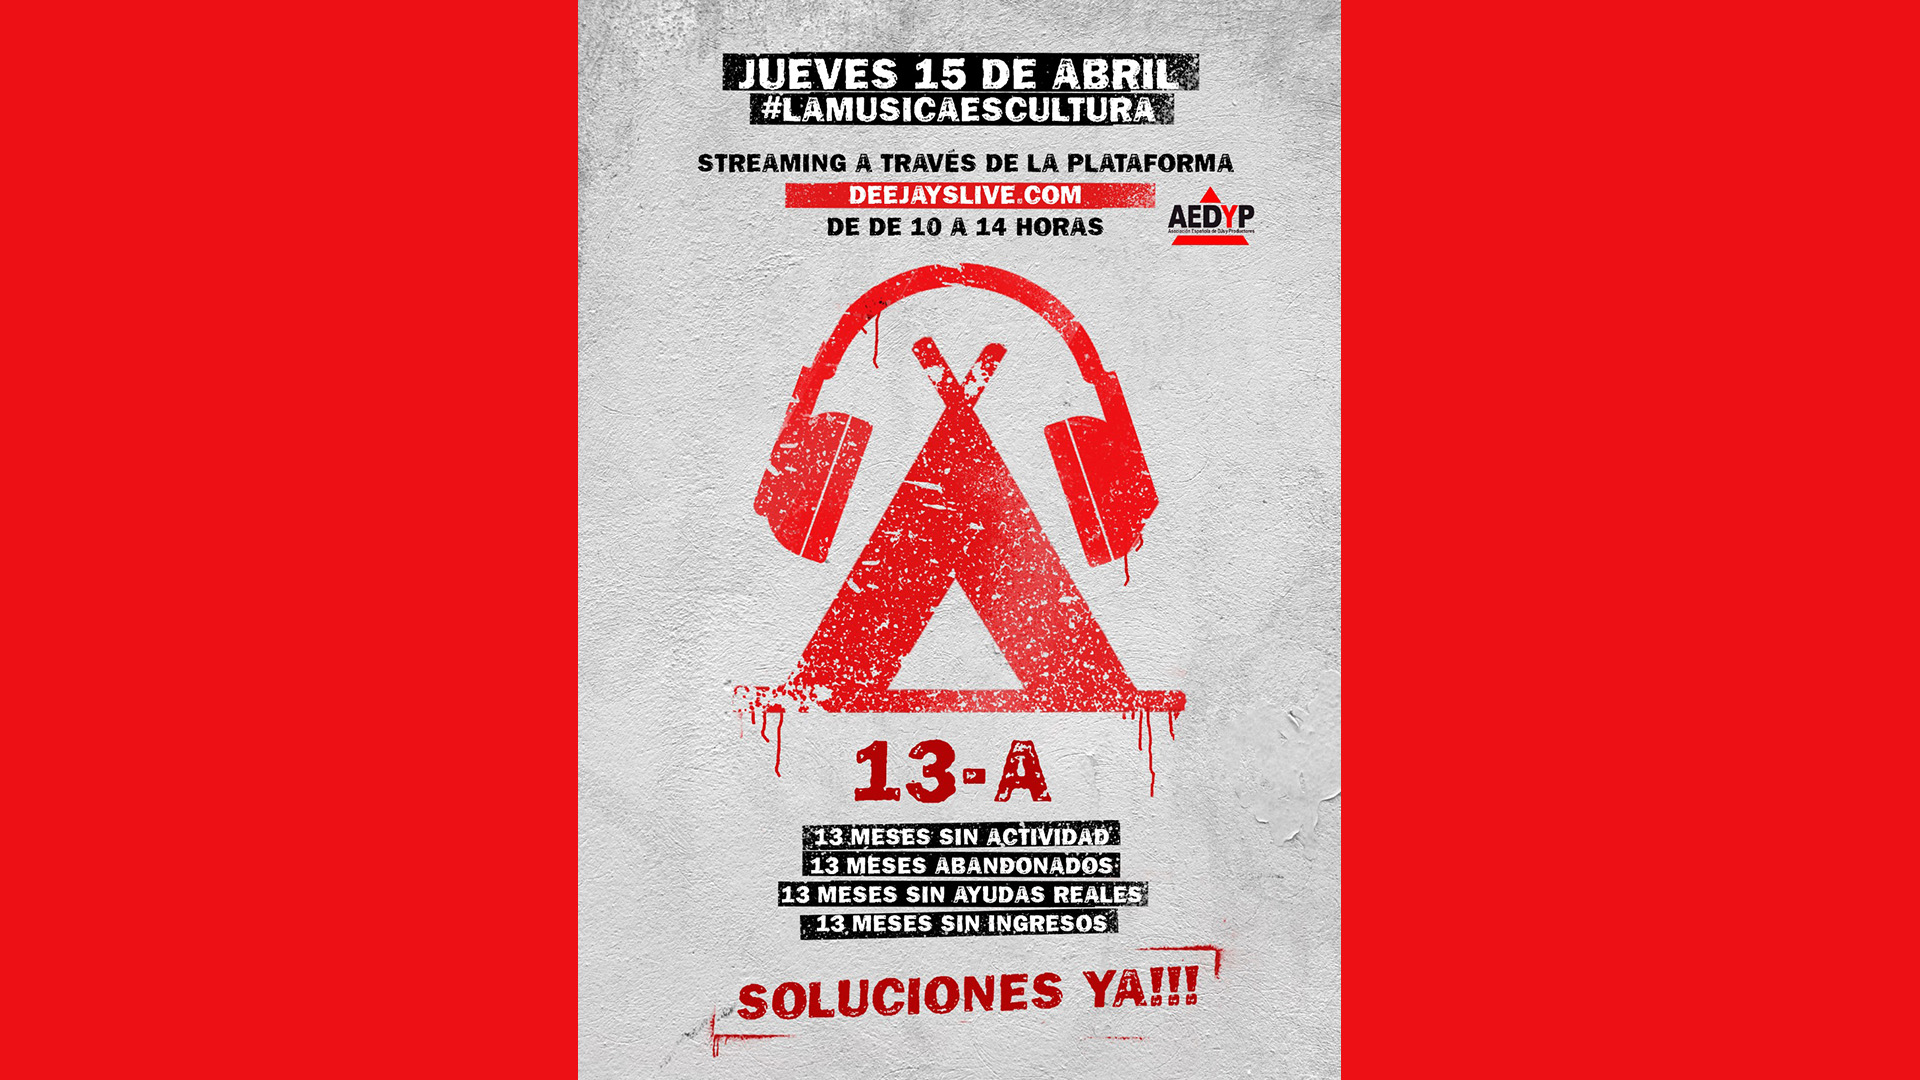 Protest against government’s unfair stance on DJs in Valencia (Spain)